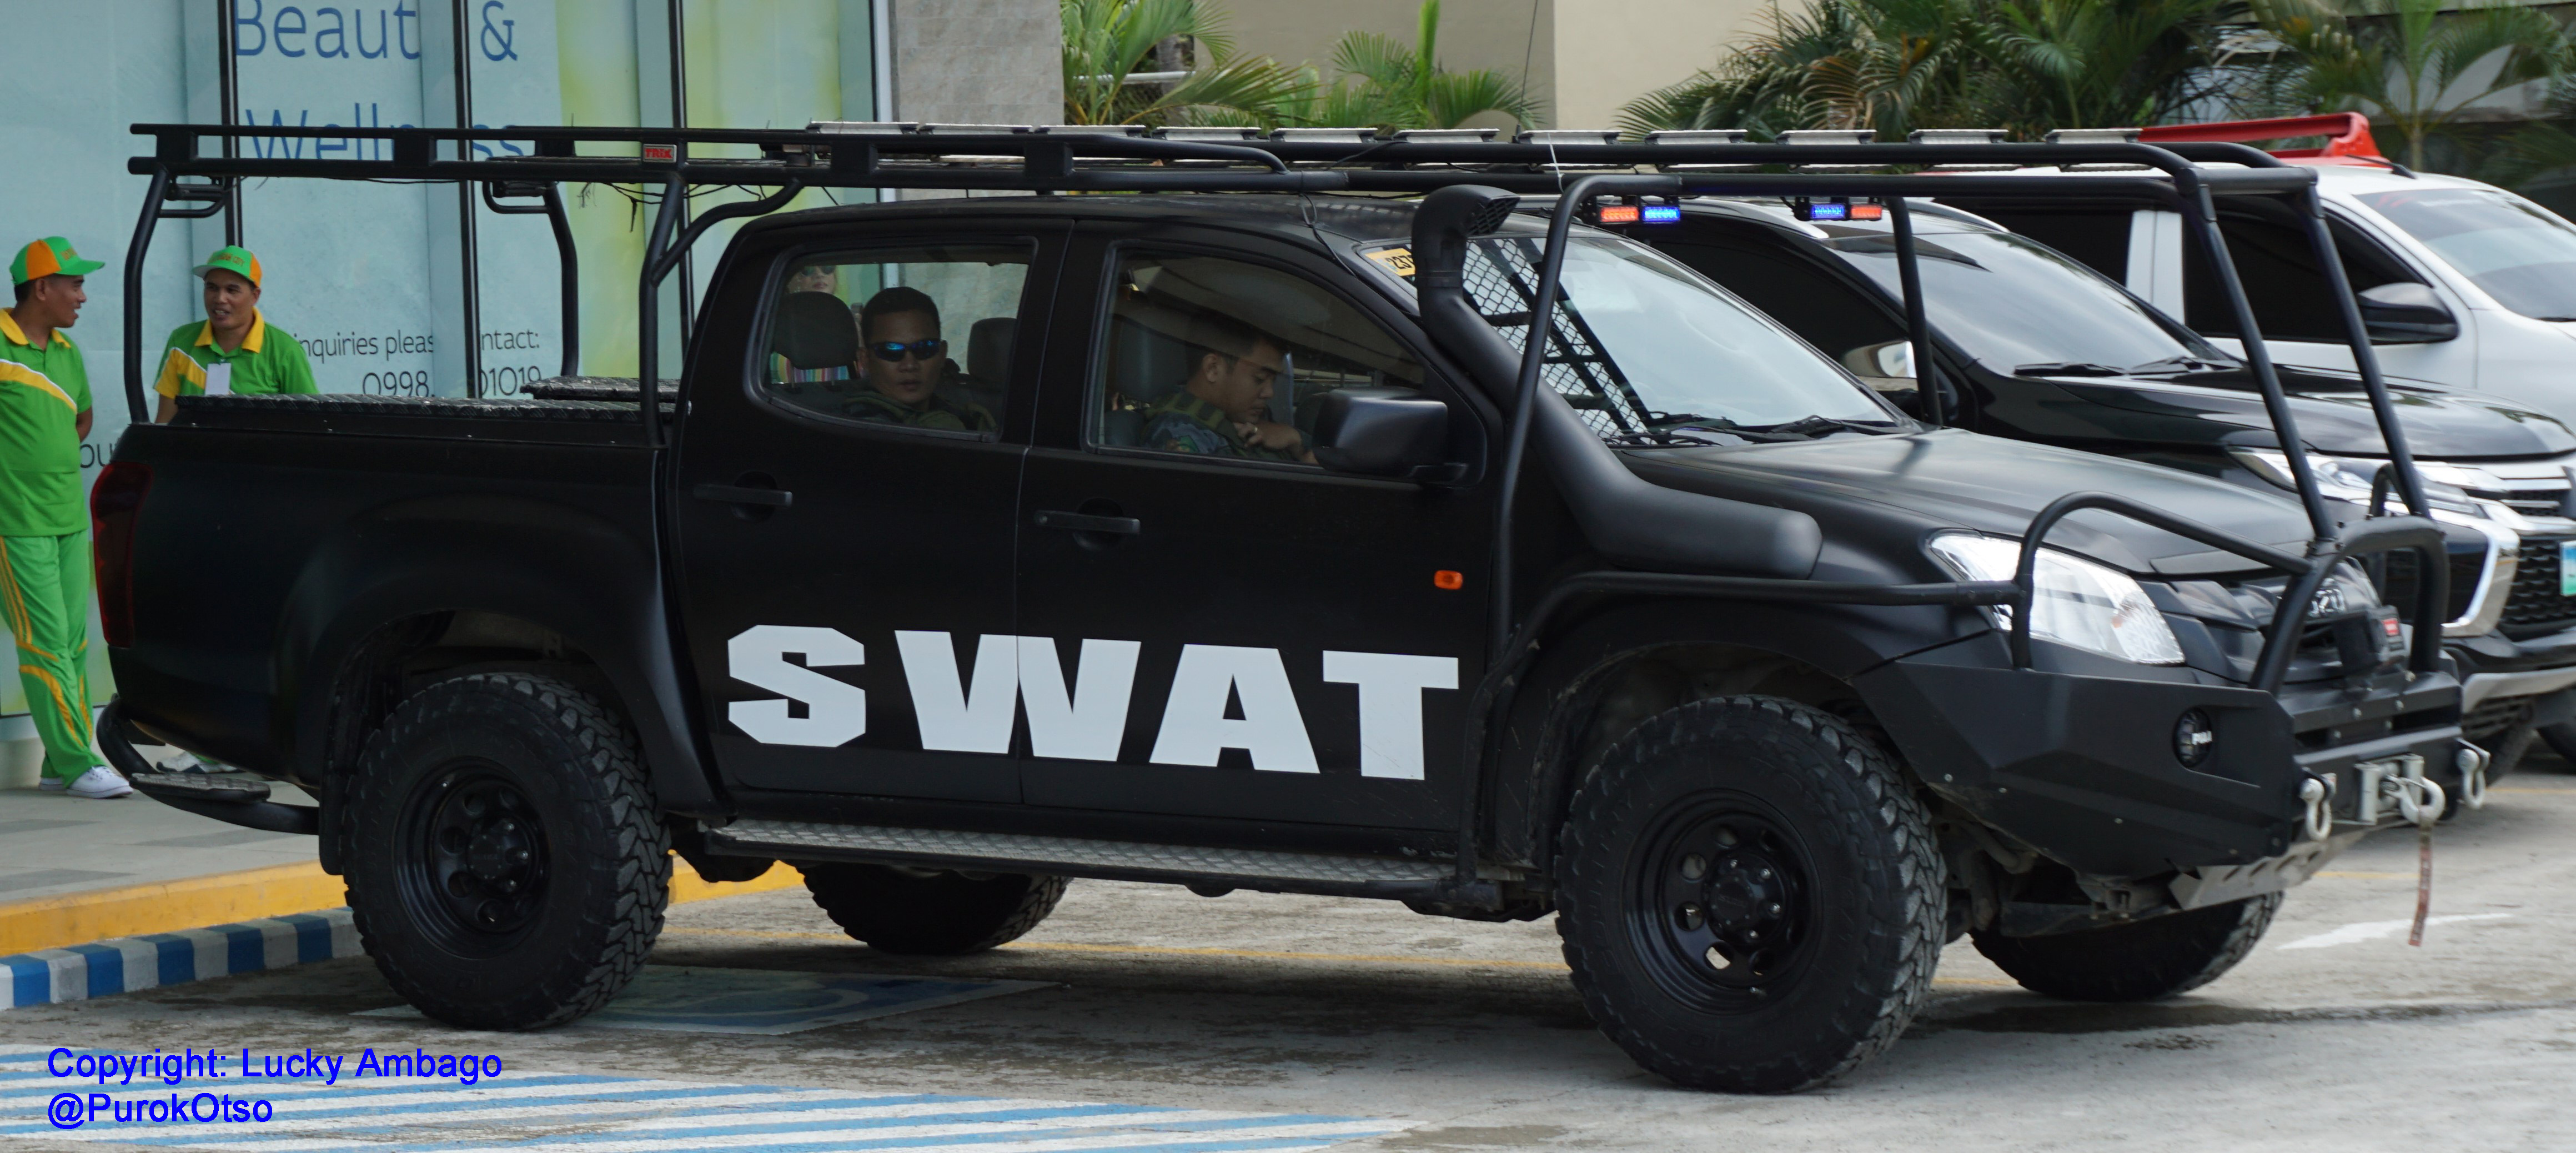 Isuzu_D-Max_Special_weapons_and_Tactics_Vehicle_of_PNP_13th_RPSB.jpg